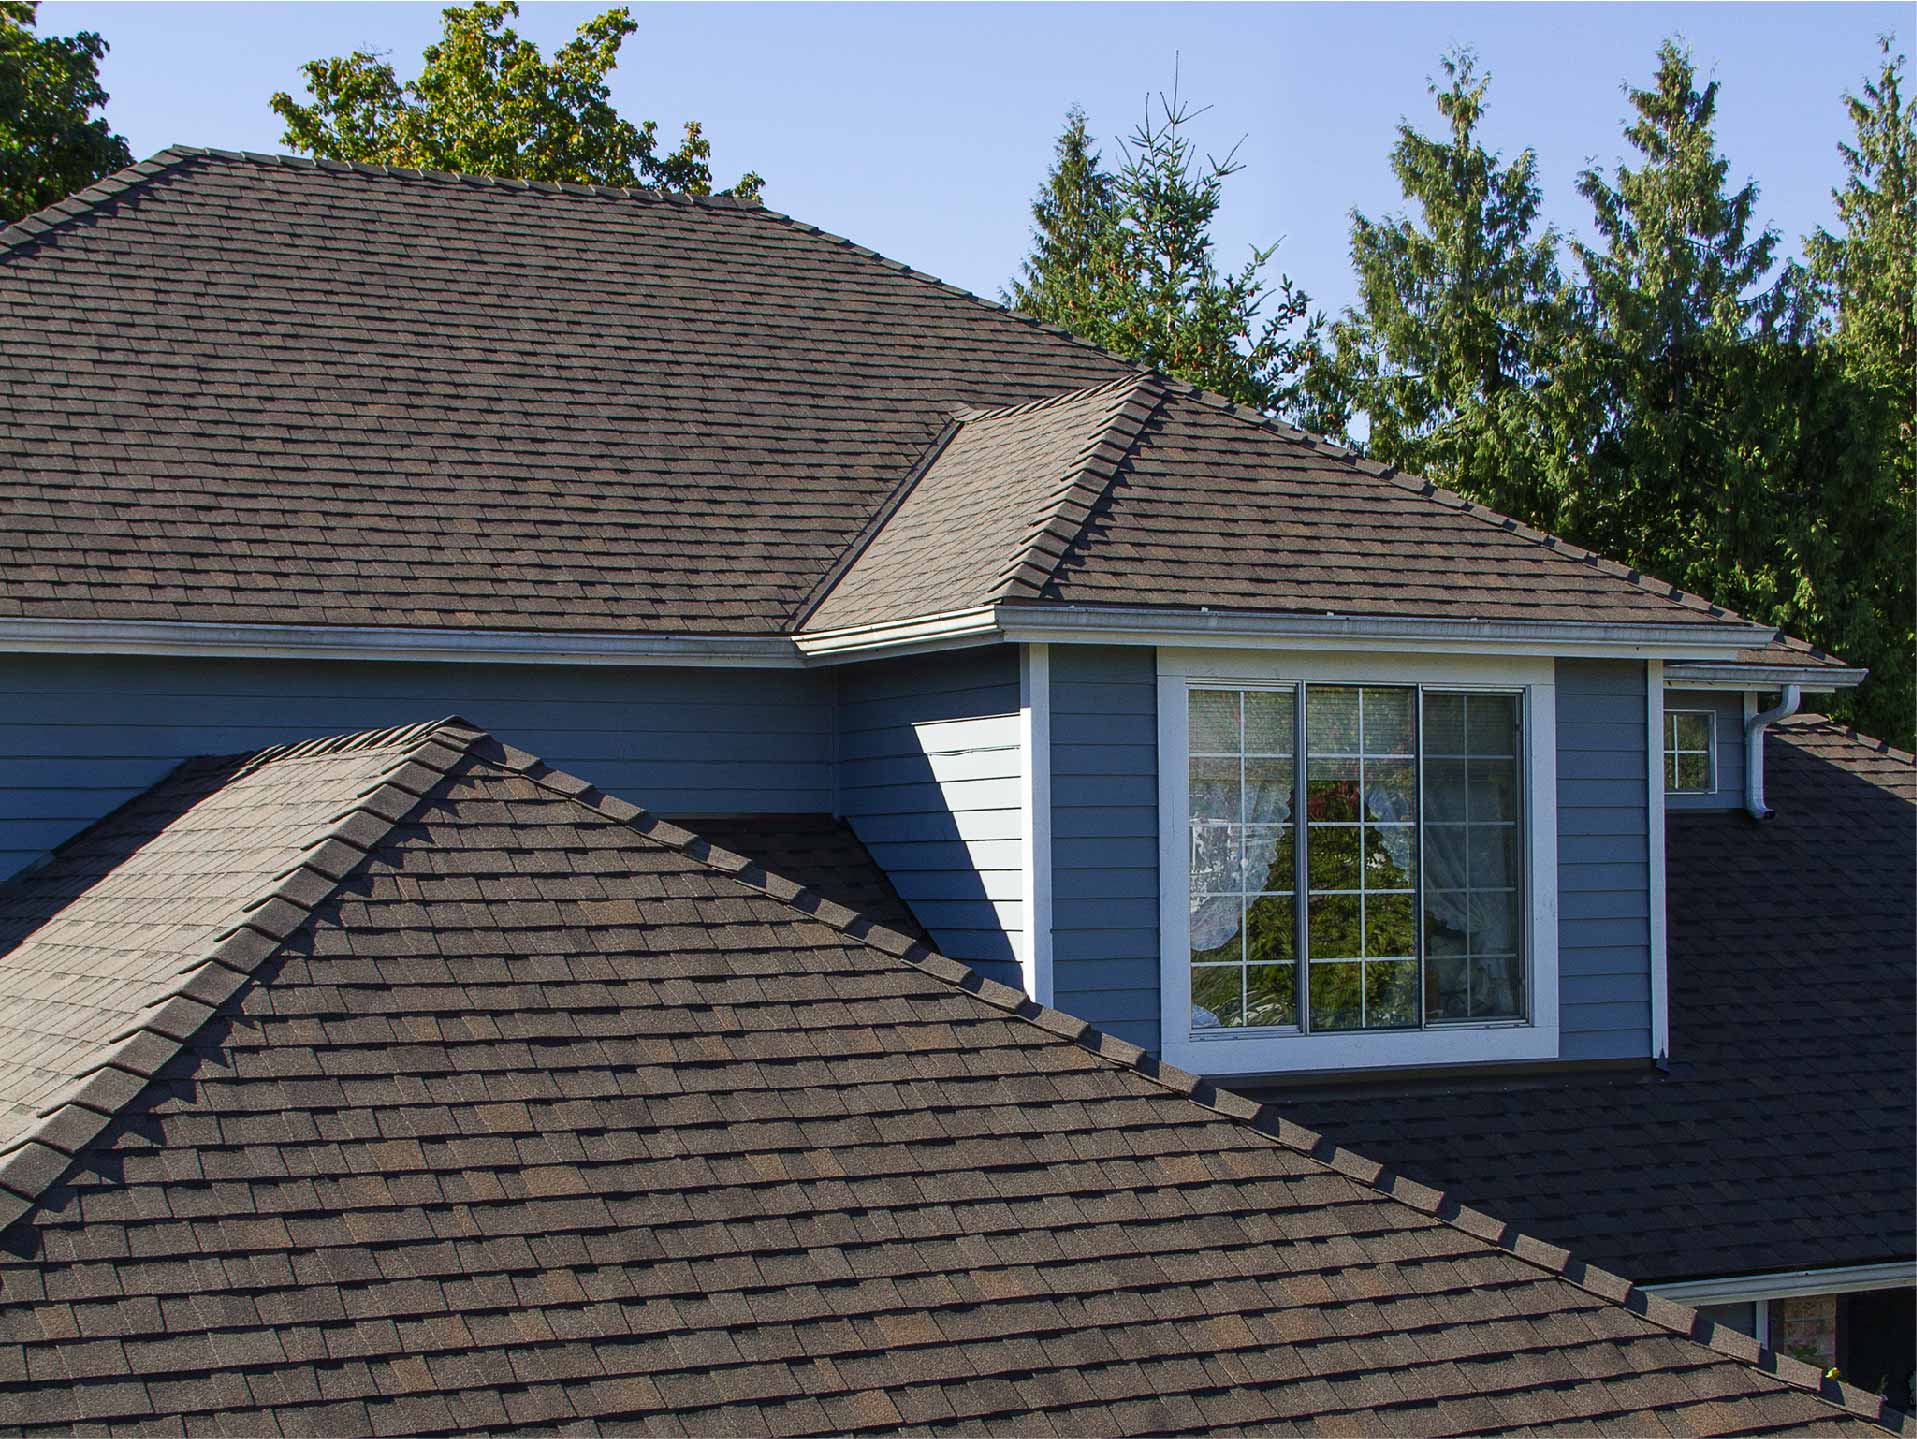 Rooftop image of a blue house with PABCO Premier Oakwood asphalt shingles on the roof.